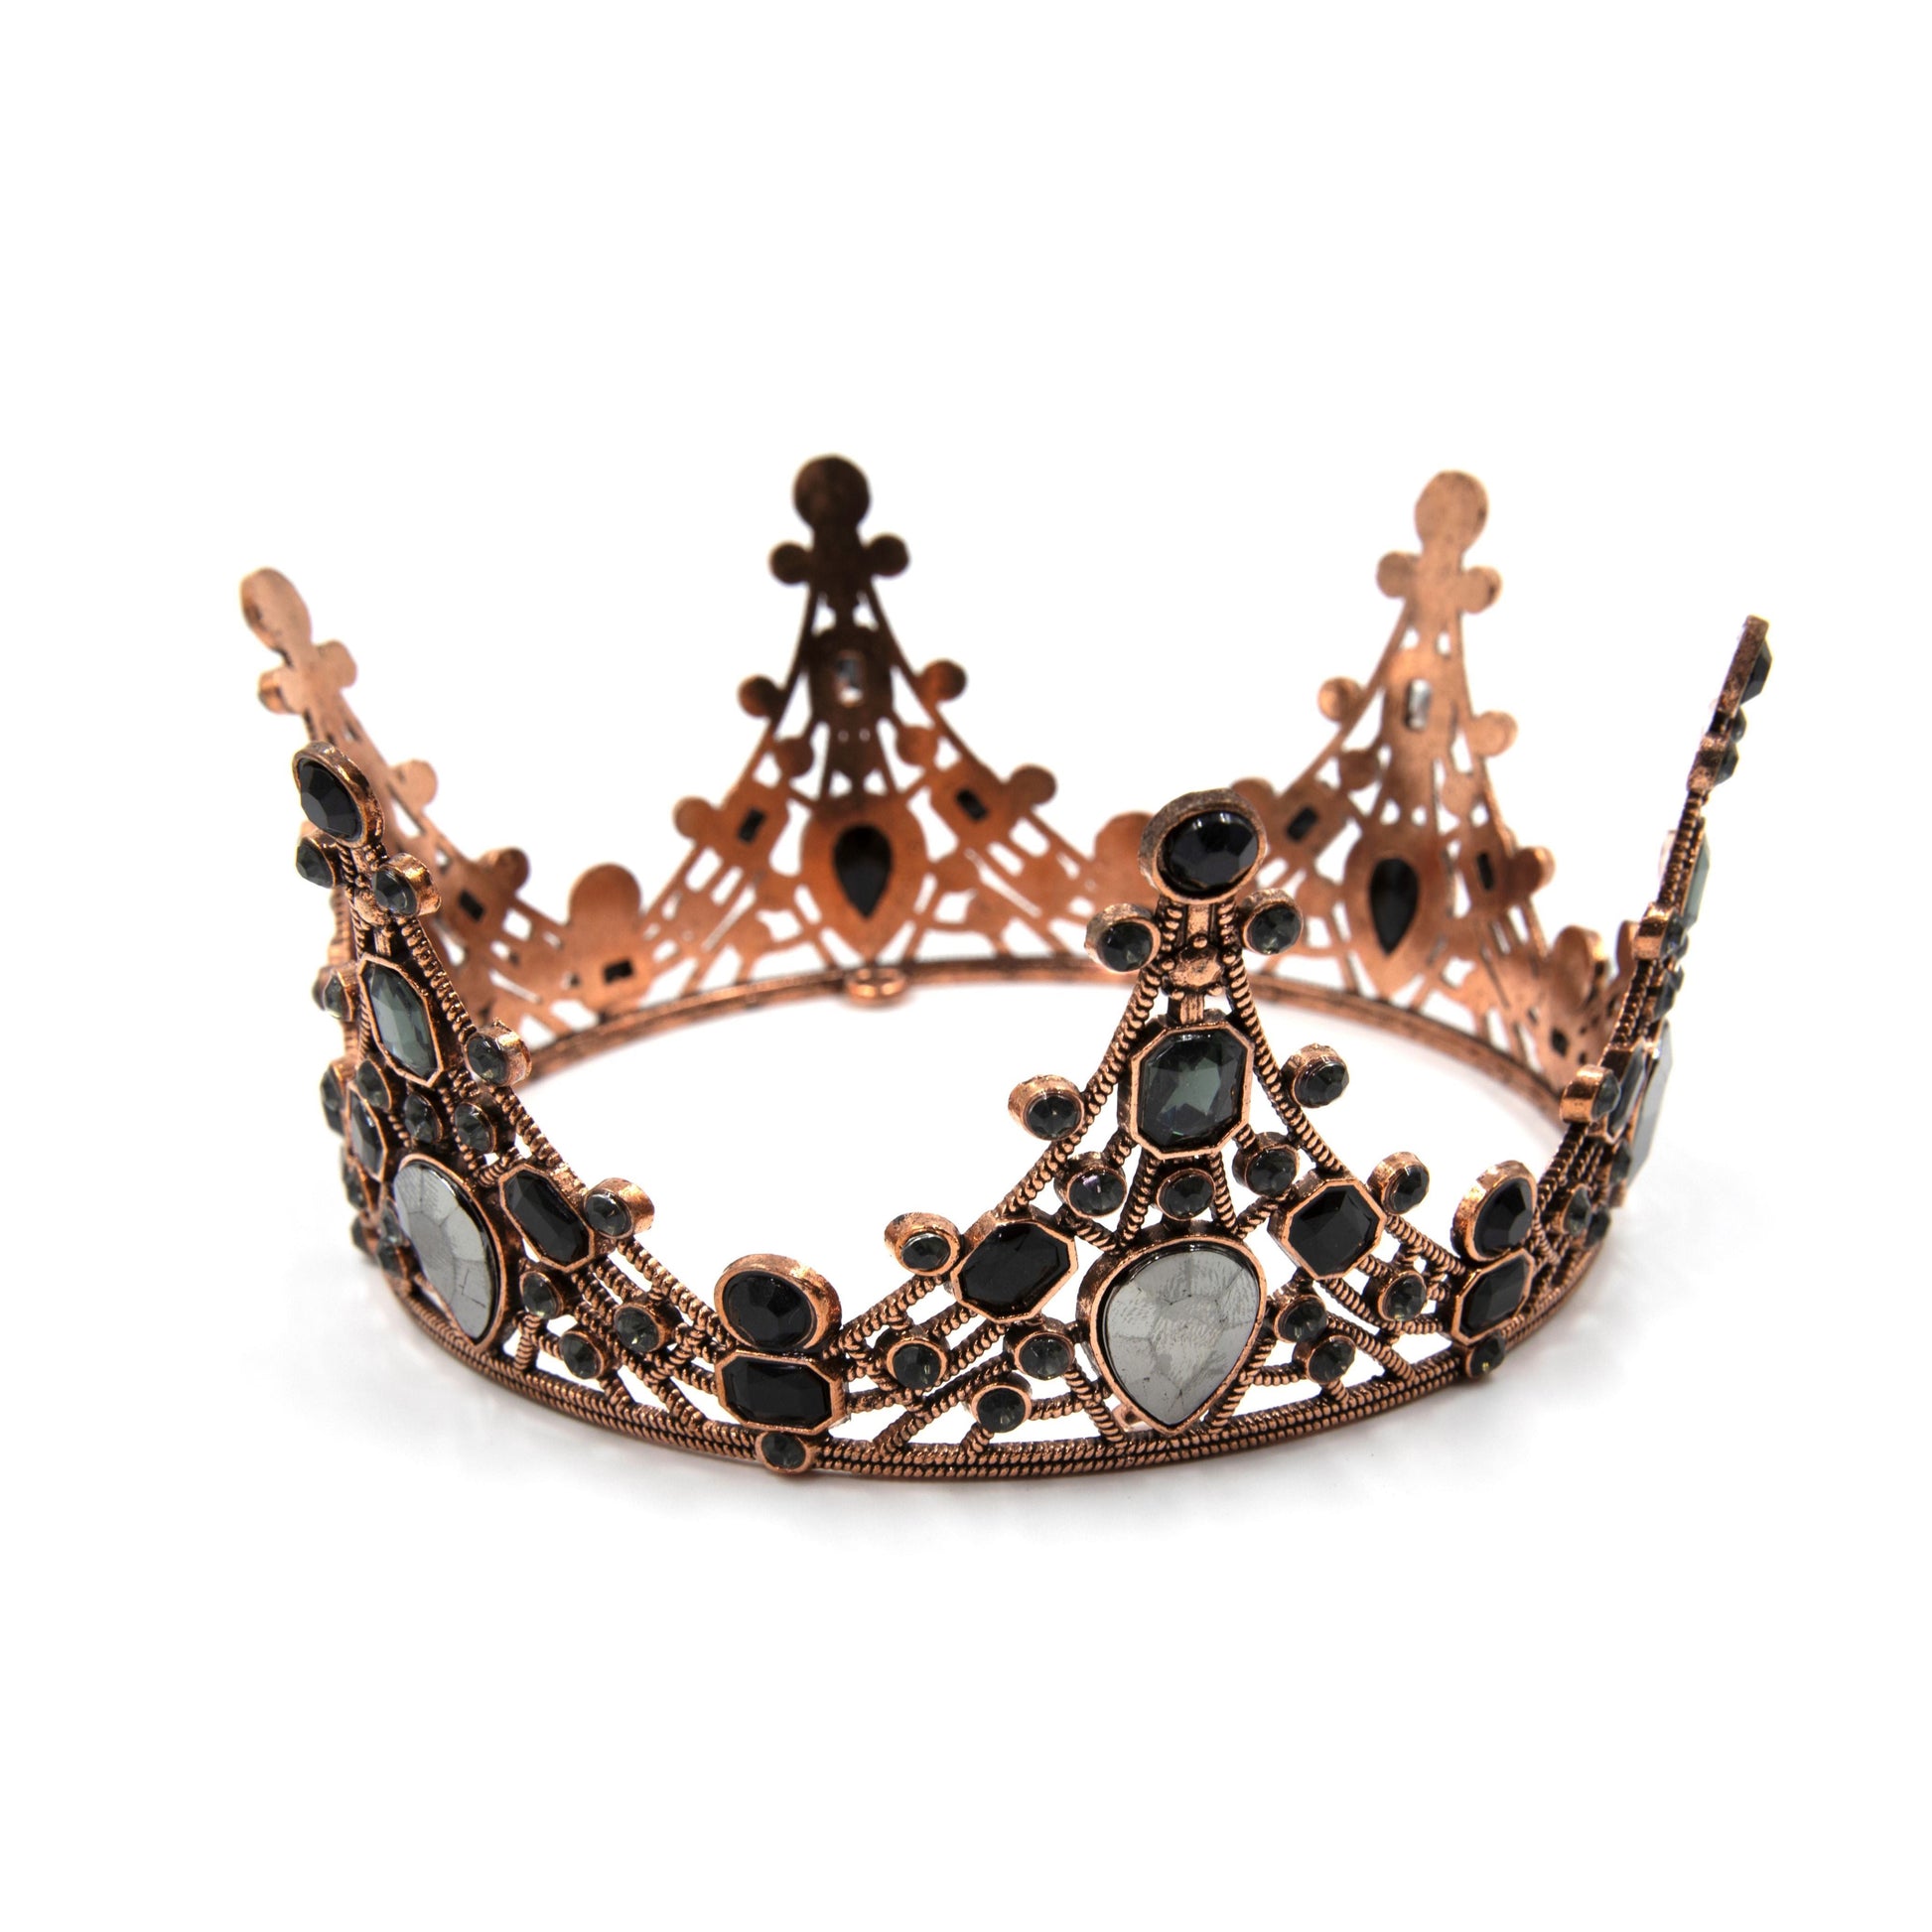 Queen of Darkness Gothic Crown Tiara in Rose Gold and Black Gems